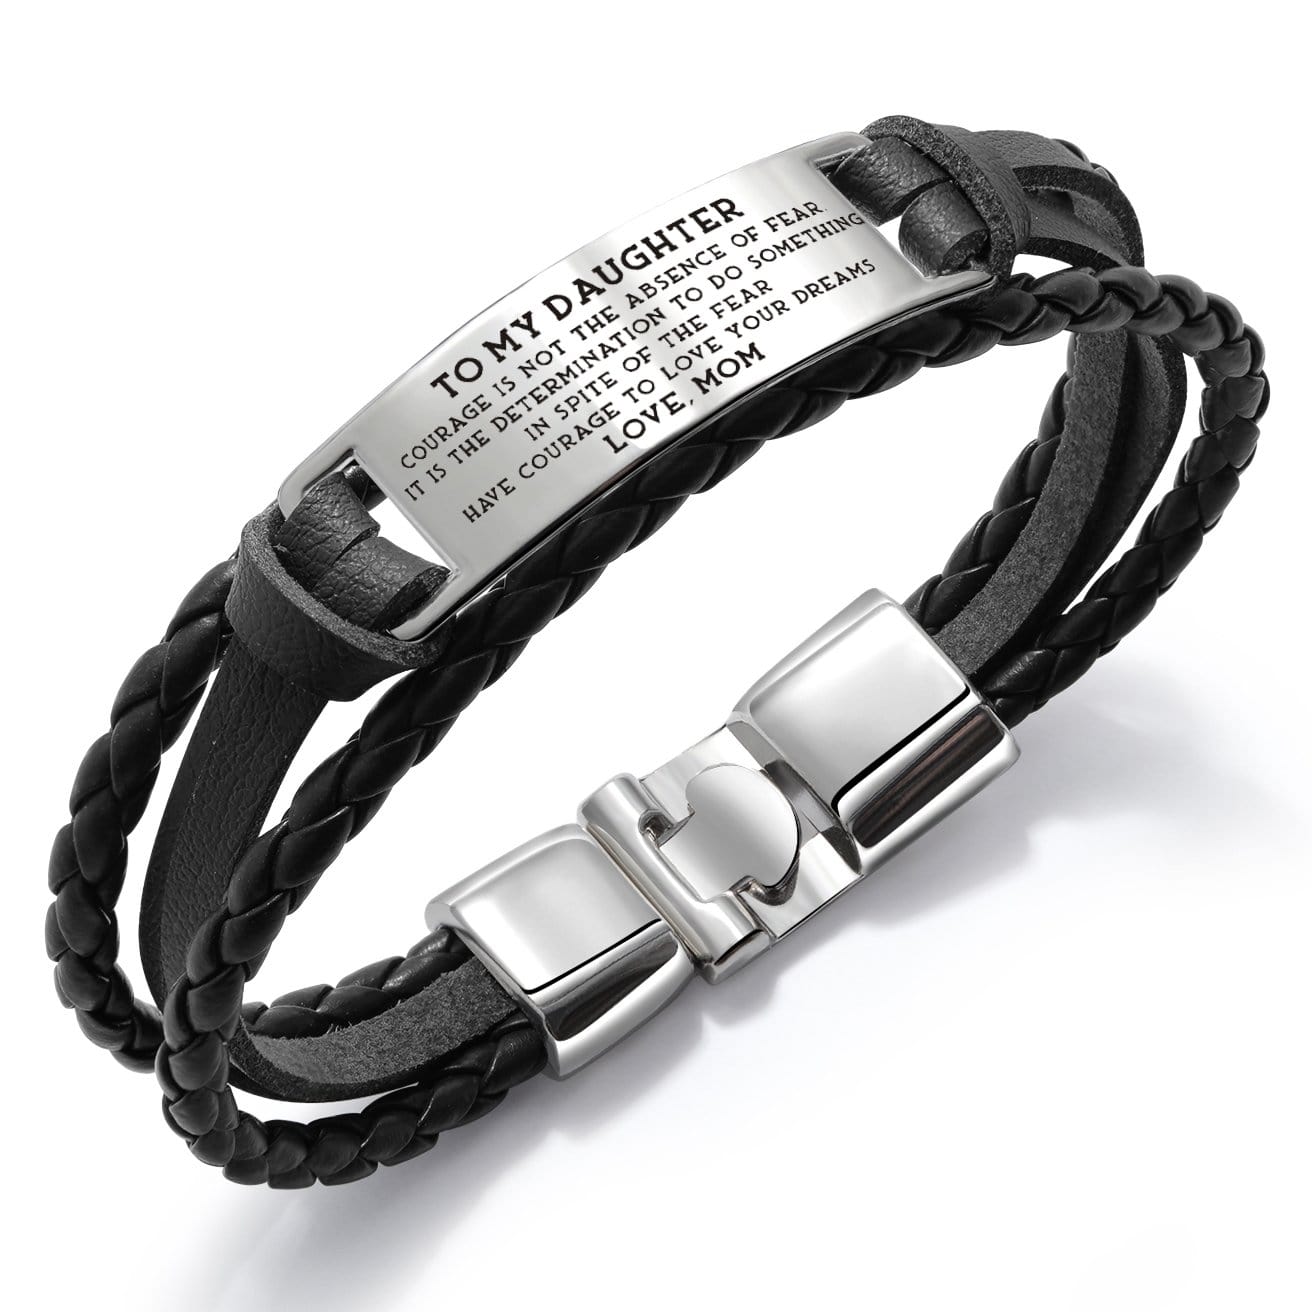 Bracelets Mom To Daughter - Have Courage To Love Your Dreams Leather Bracelet Black GiveMe-Gifts